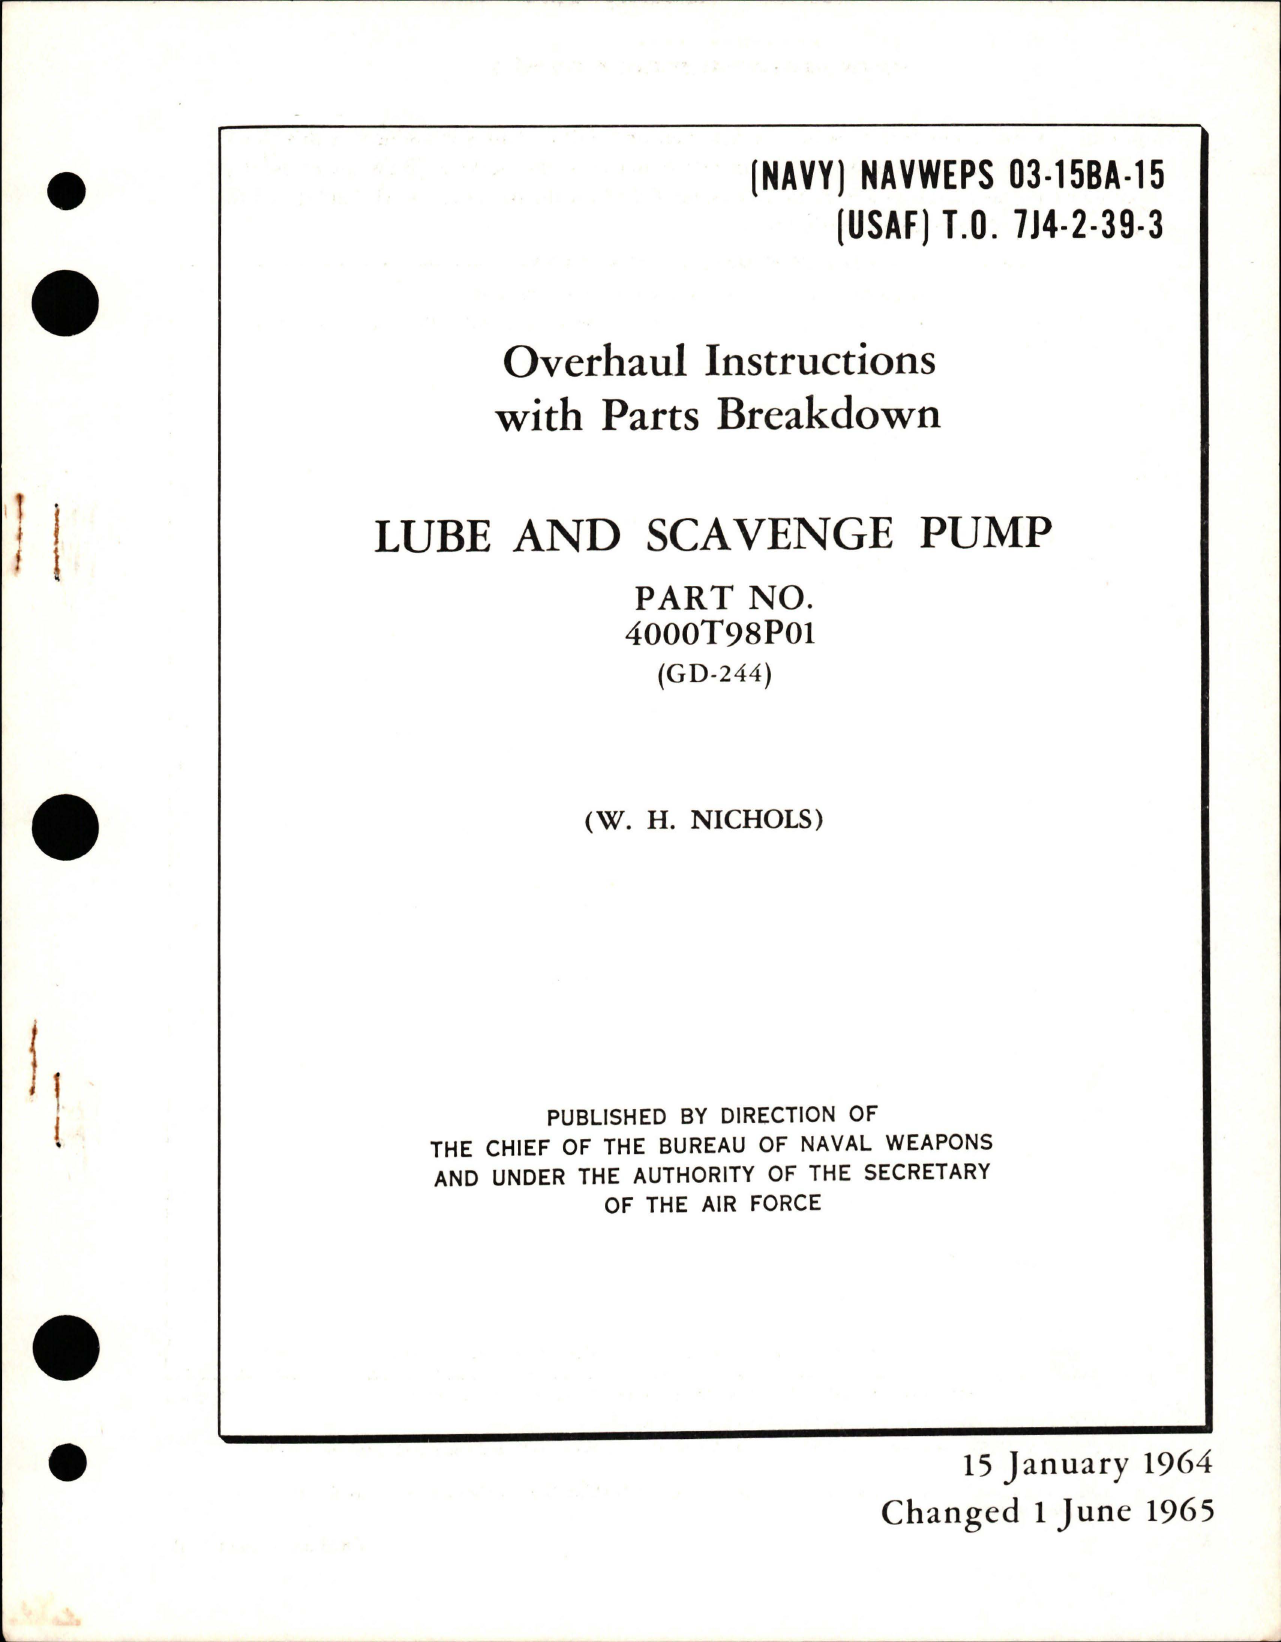 Sample page 1 from AirCorps Library document: Overhaul Instructions with Parts for Lube and Scavenge Pump - Part 4000T98P01 - GD-244 